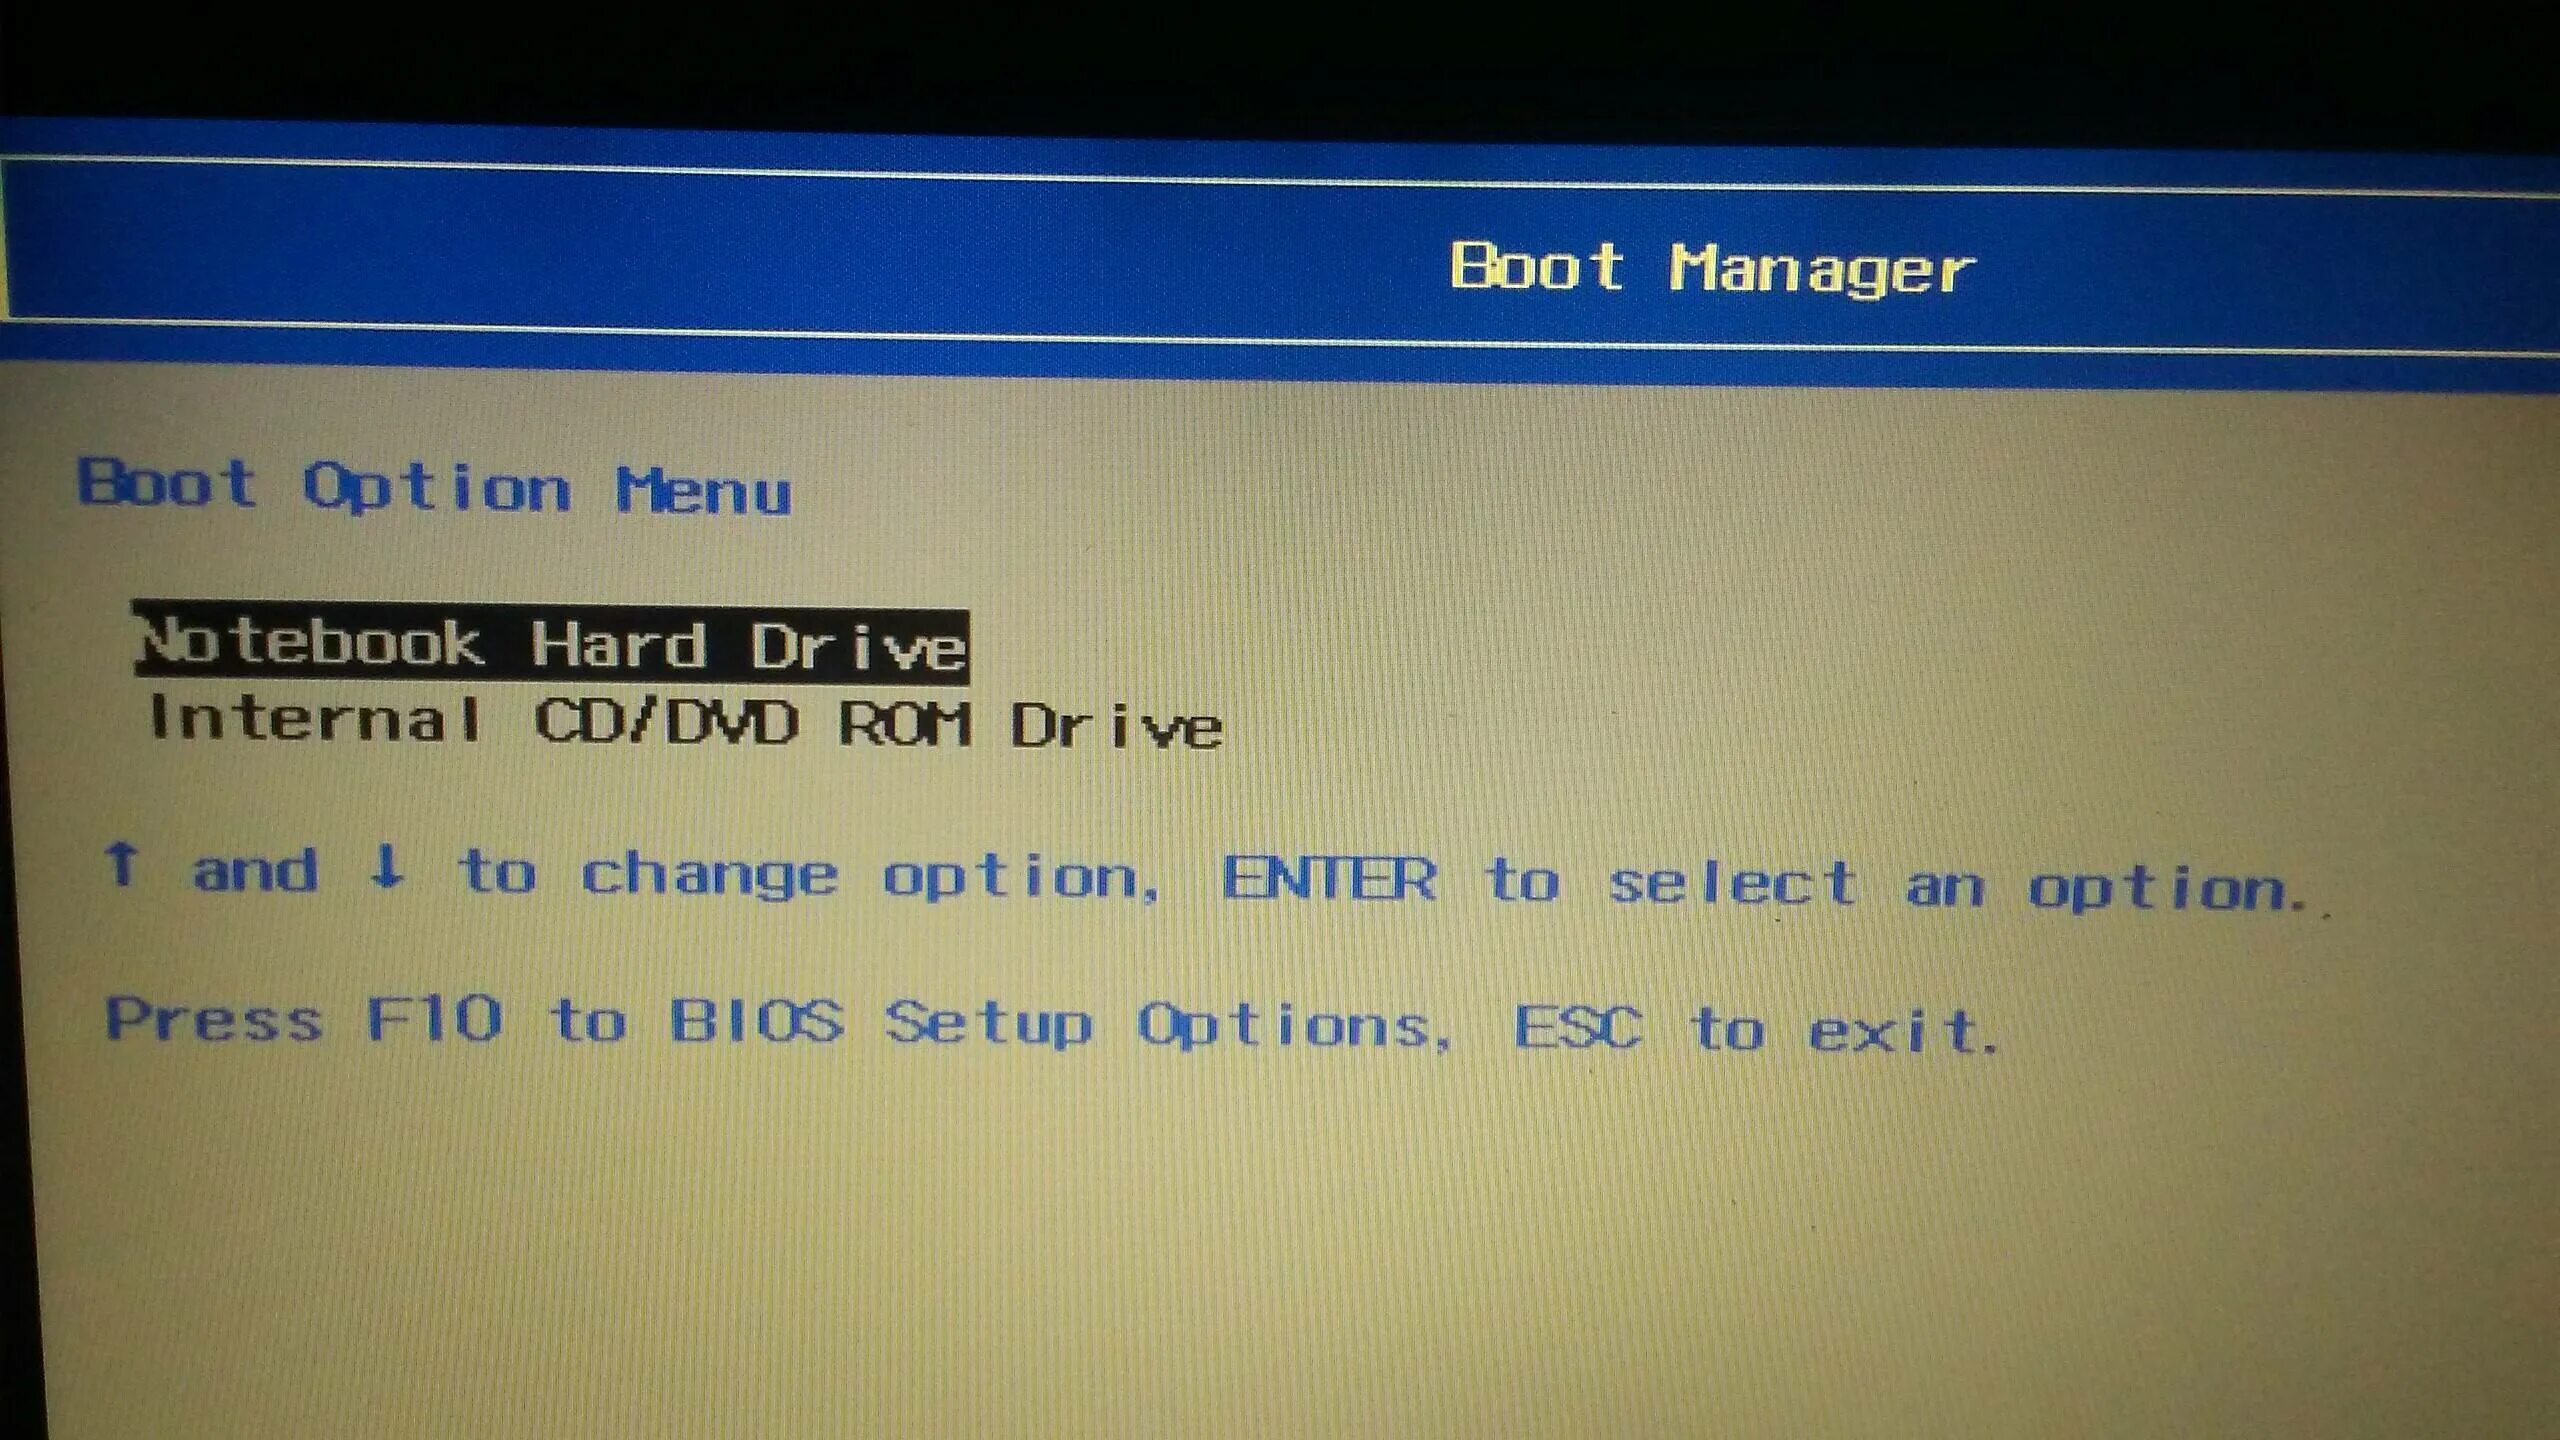 Boot manager биос. Boot option menu. Windows Boot menu. Биос с Boot option menu. Grub Boot Manager.